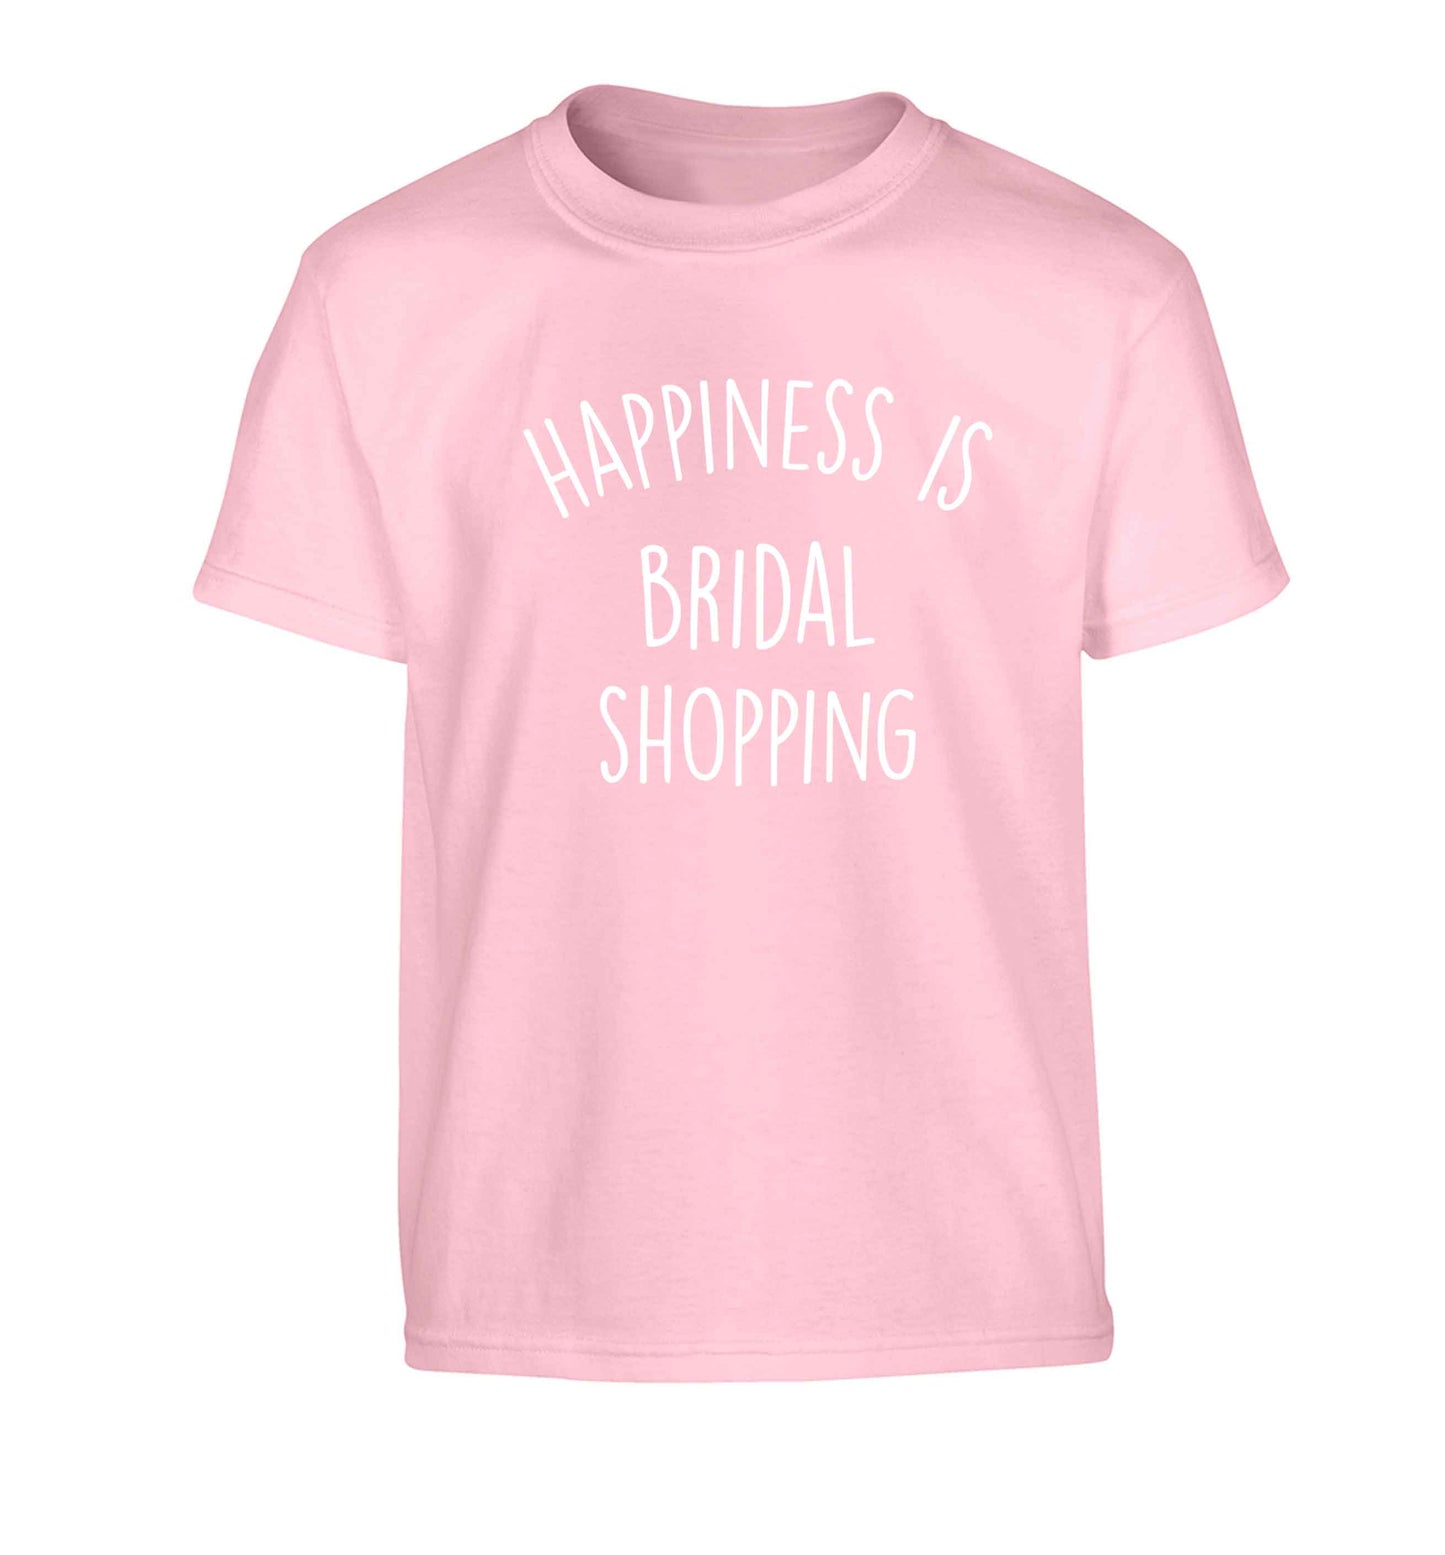 Happiness is bridal shopping Children's light pink Tshirt 12-13 Years